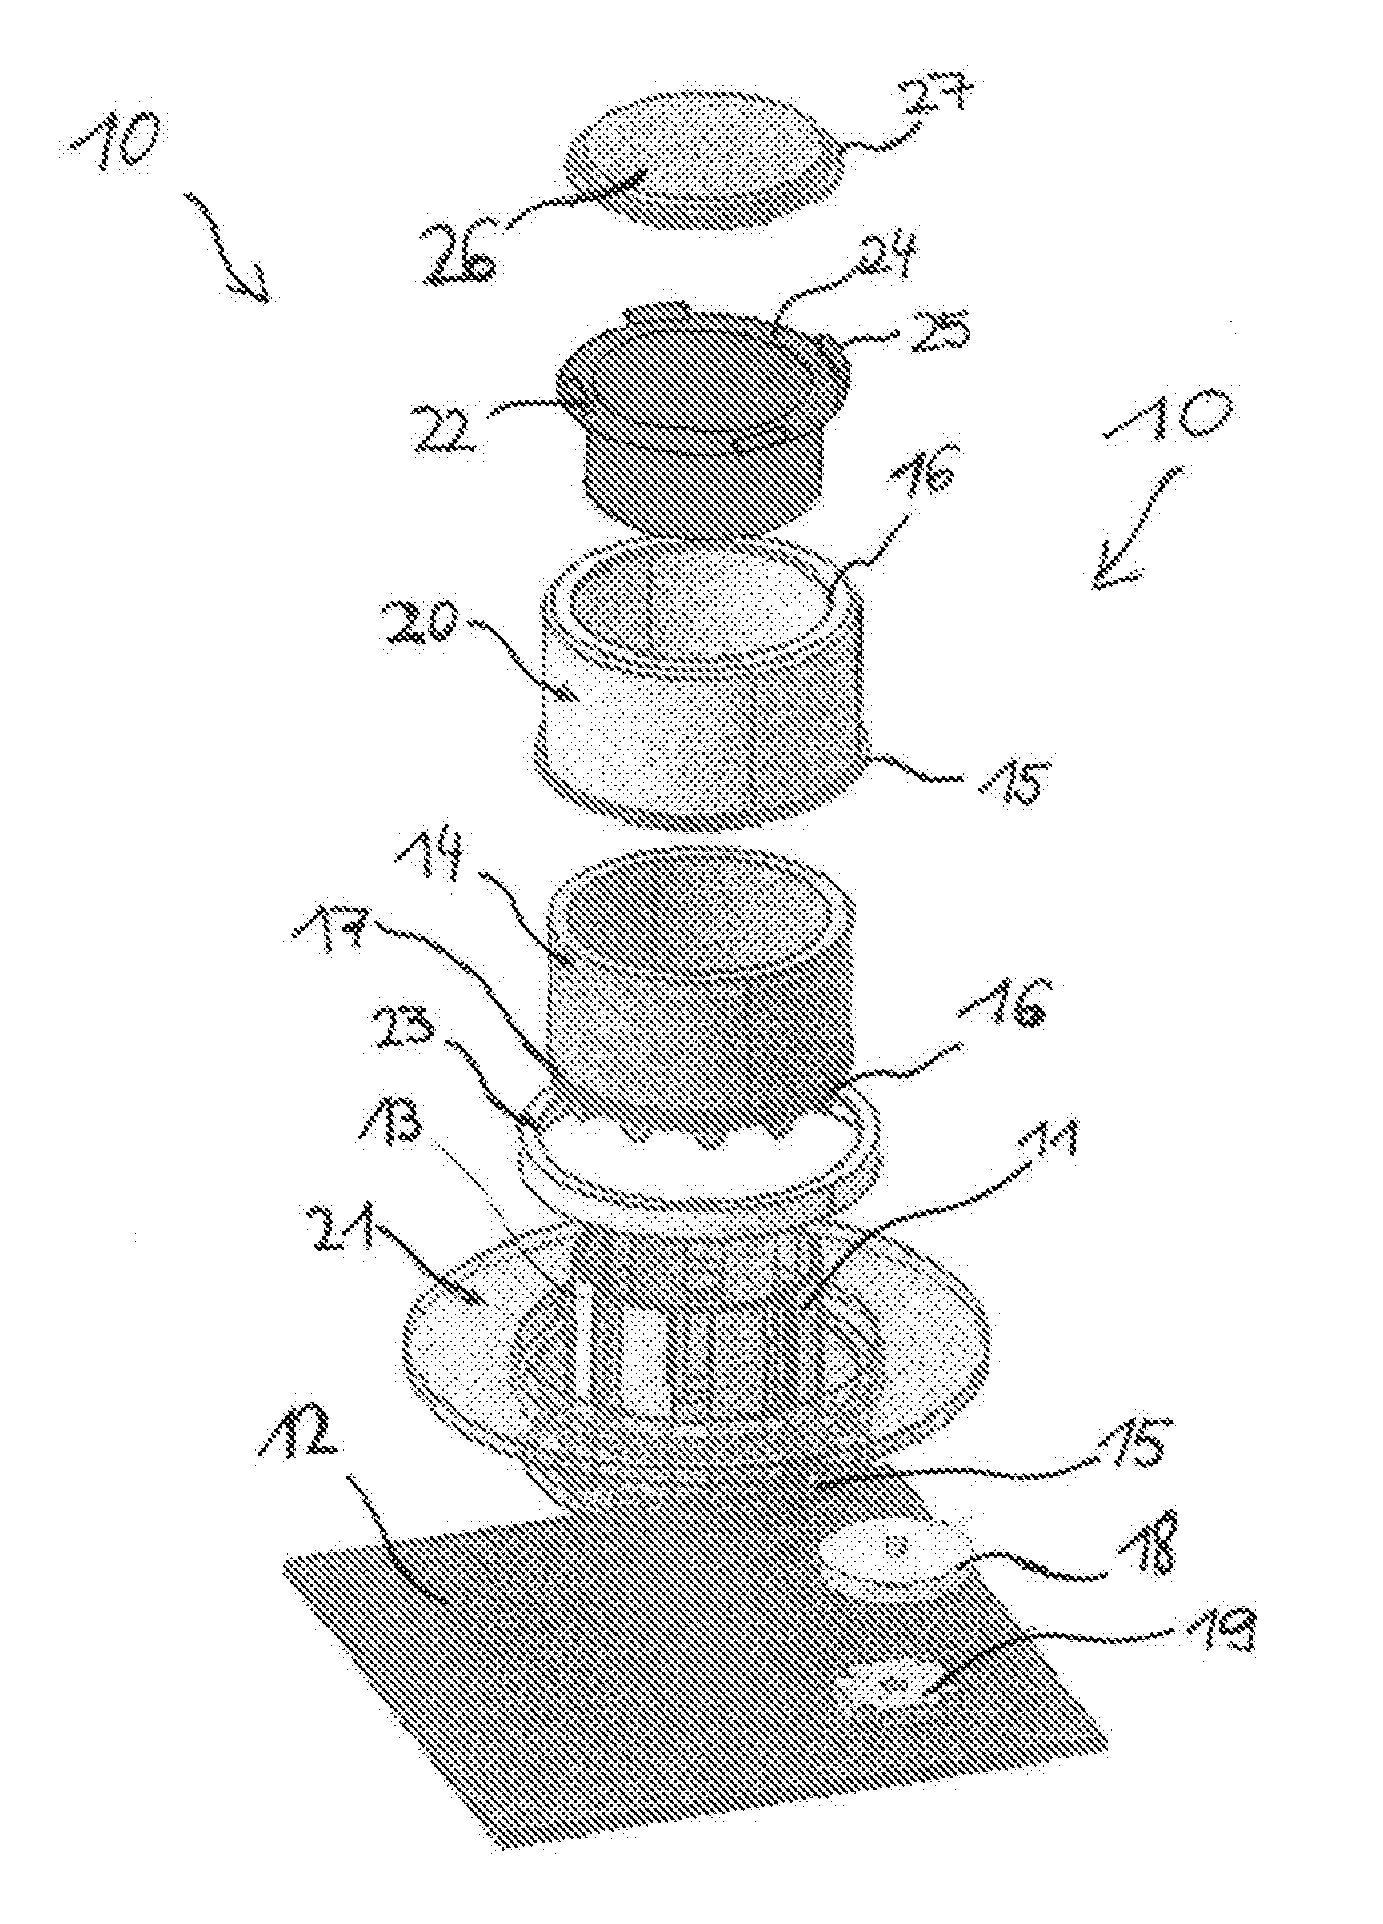 Capacitive sensing node integration to a surface of a mechanical part